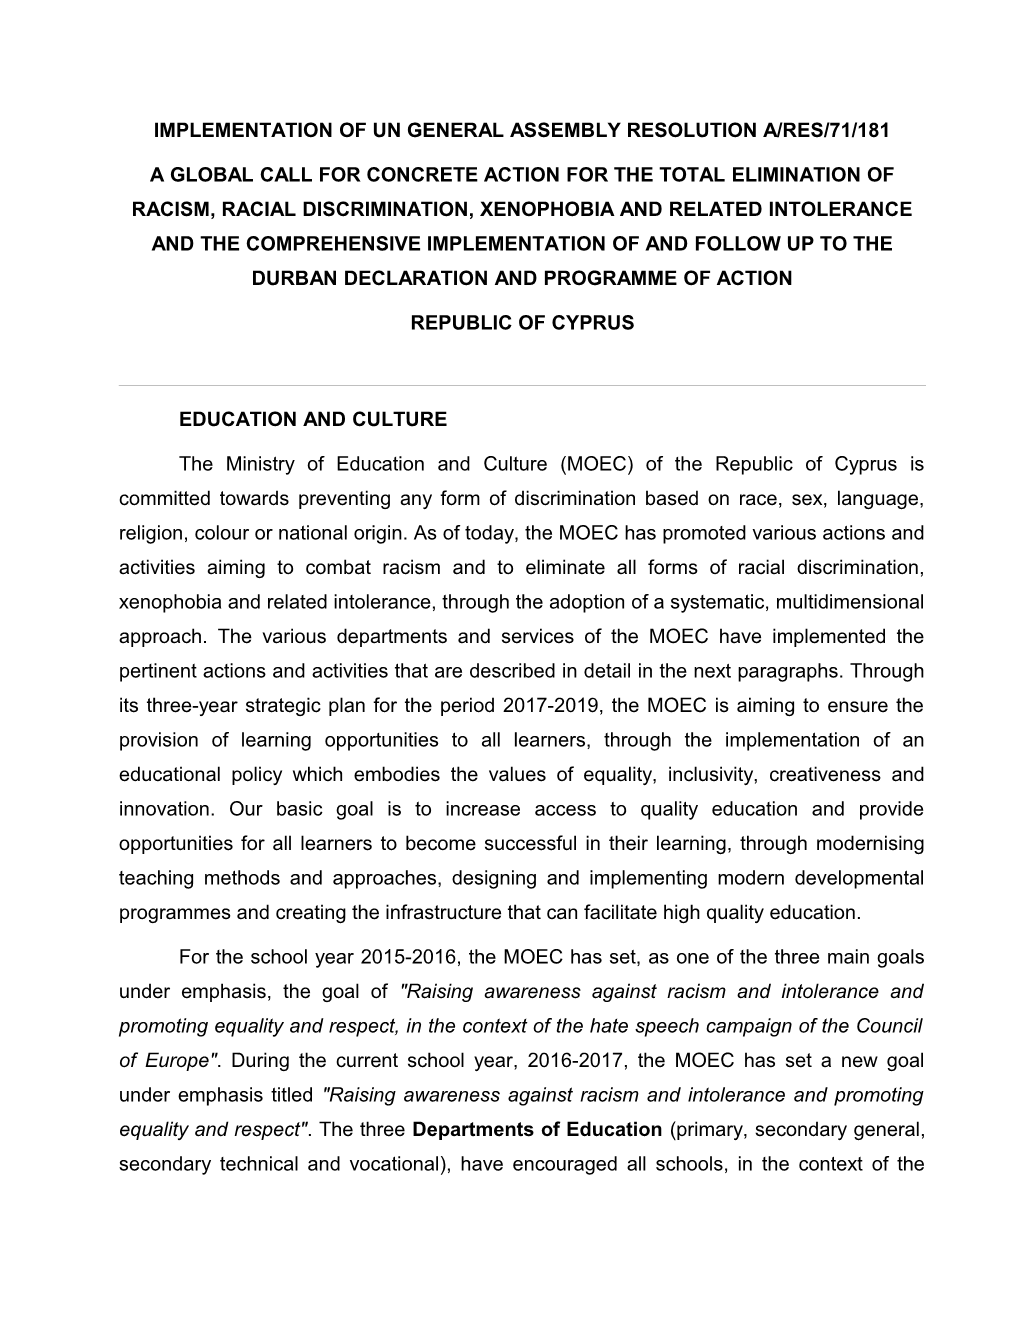 Implementation of Un General Assembly Resolution A/Res/71/181